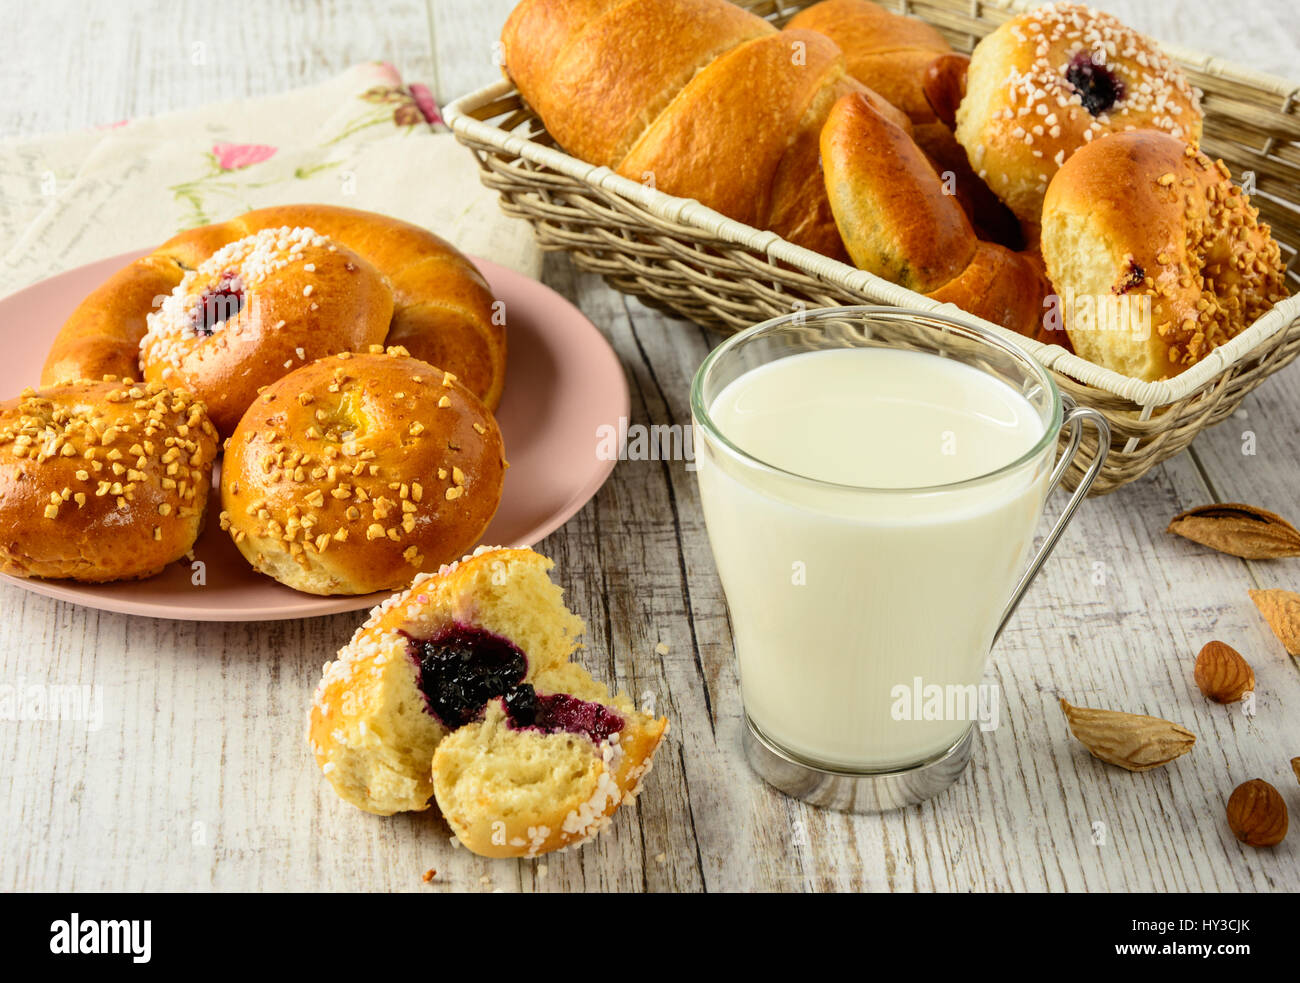 Healthy breakfast ingredients. Homemade fresh fragrant buns and milk . The food is rich in useful carbohydrates, vitamins and nutrients that are essen Stock Photo